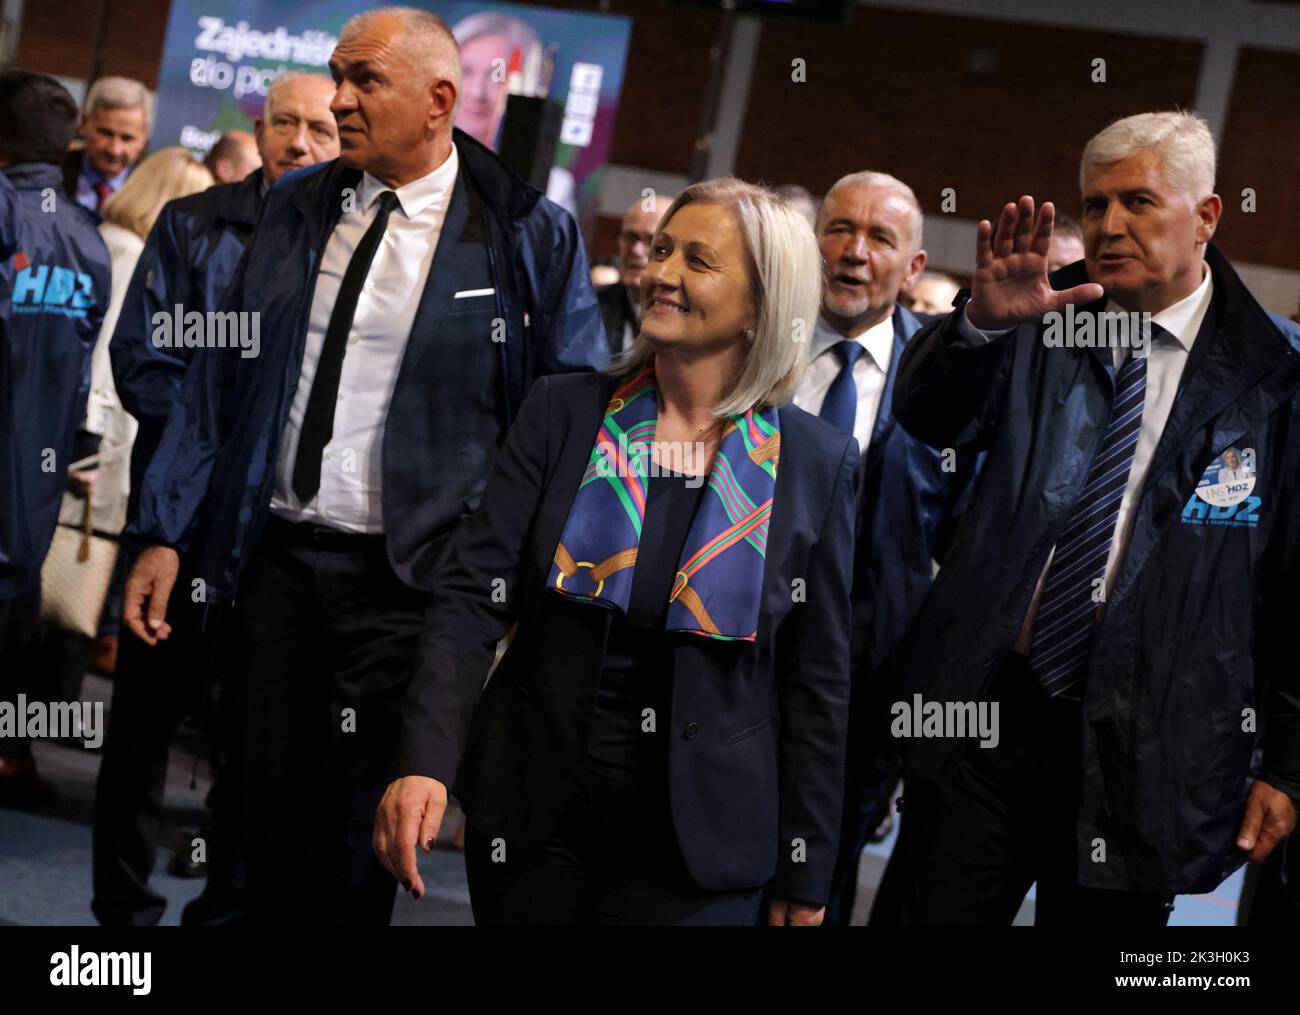 Borjana Kristo of the Croatian Demotracit Union and Croat candidate of the Tri-partite Bosnian Presidency and Dragan Covic, President of the Croatian Democrtic Union attend a pre-election rally in Zepce, Bosnia and Herzegovina, September 26, 2022. REUTERS/Dado Ruvic Stock Photo